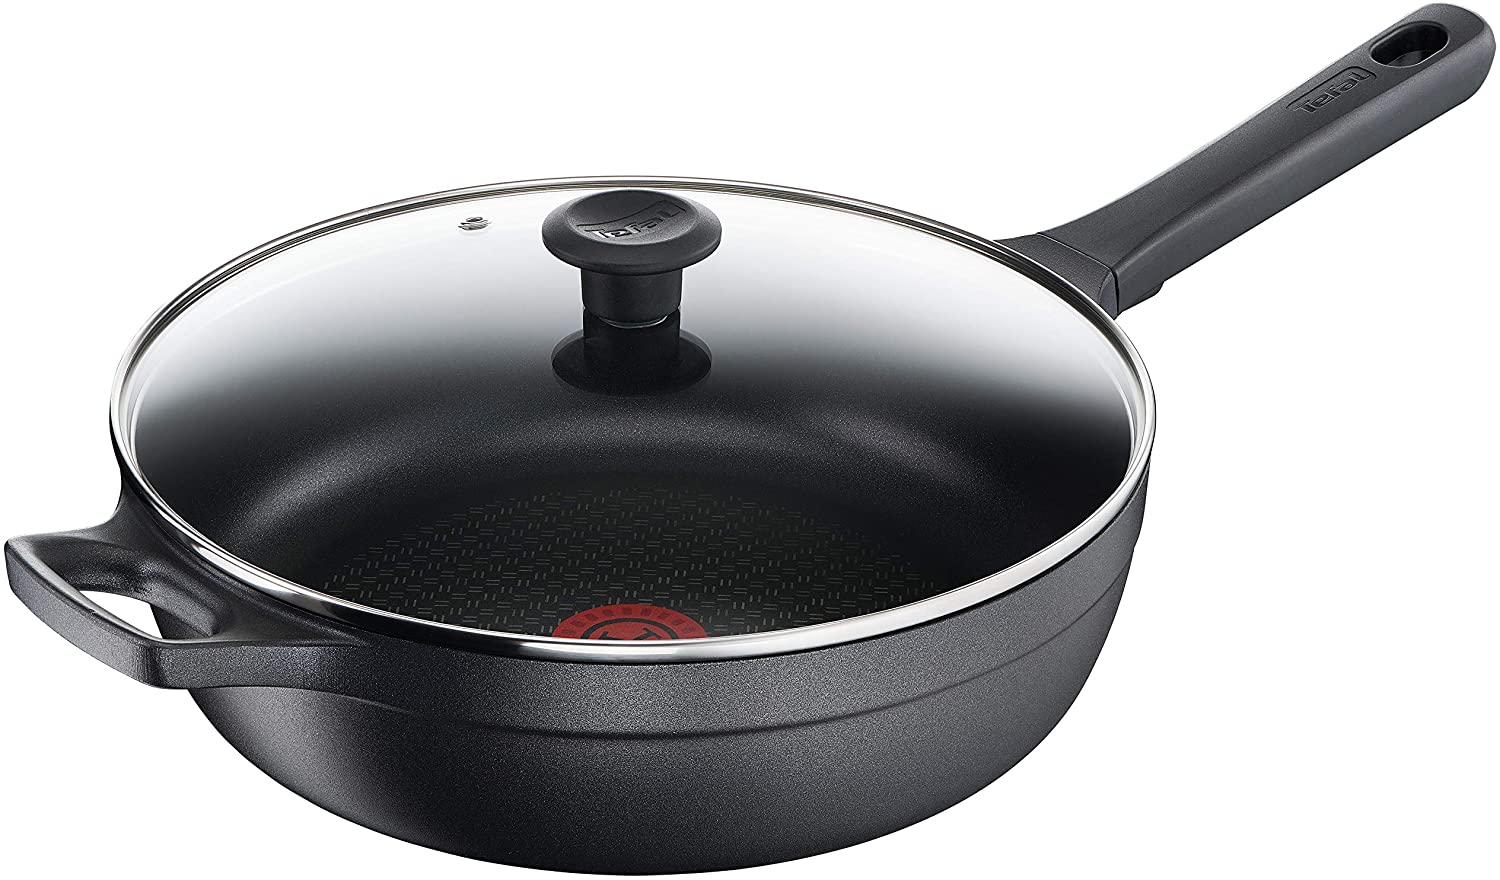 Tefal Trattoria Non-Stick Serving Pan with Cast Lid, Black